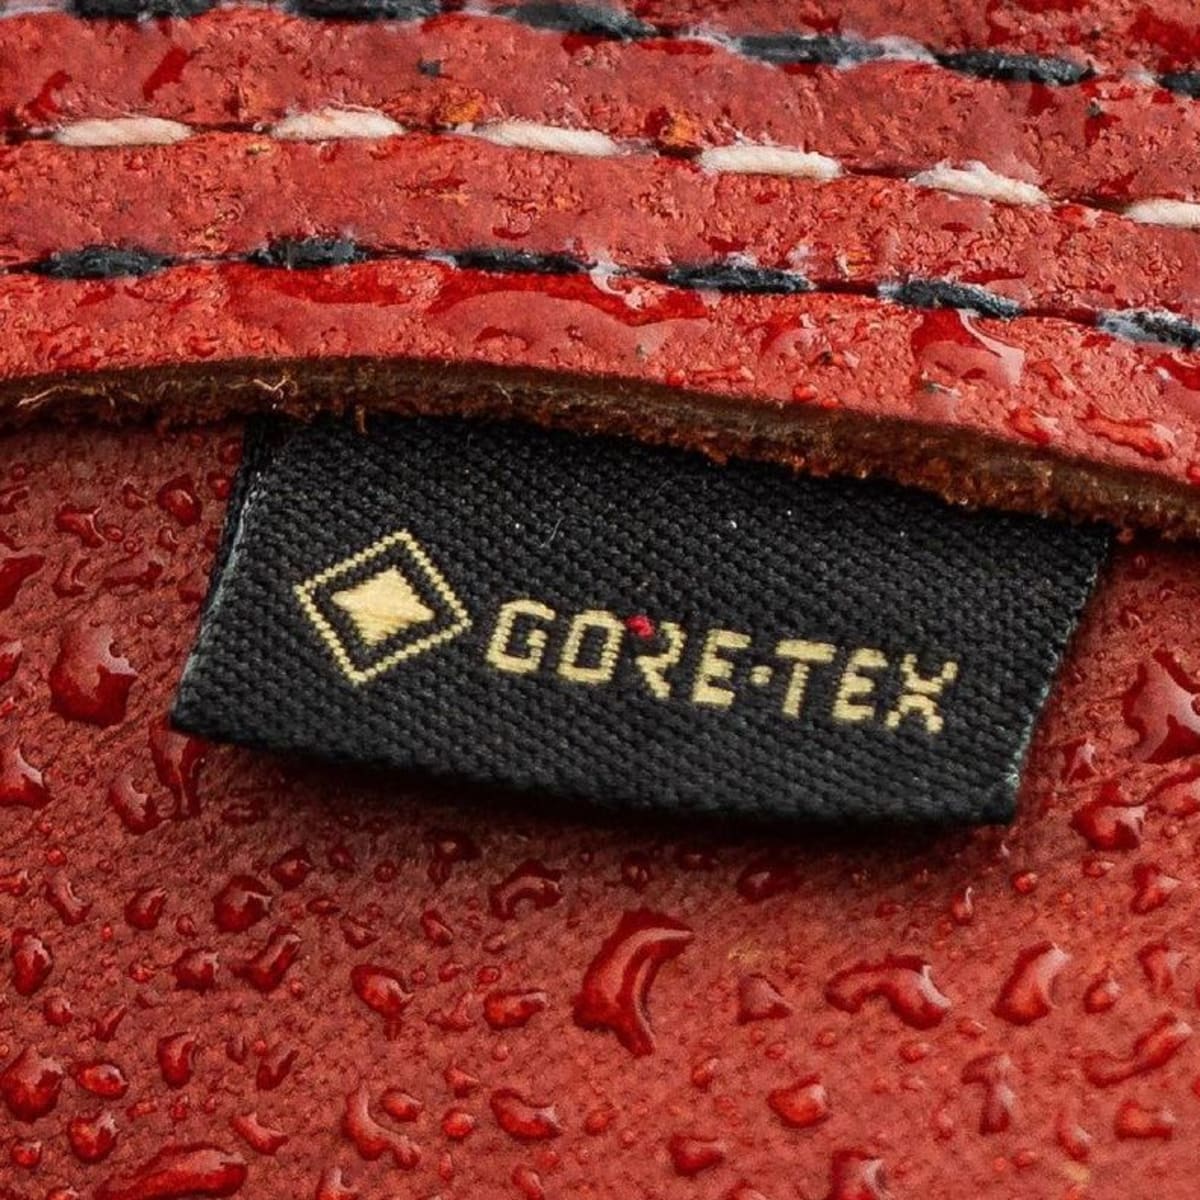 Red Wing Heritage teams up with Gore-Tex on a new version of the